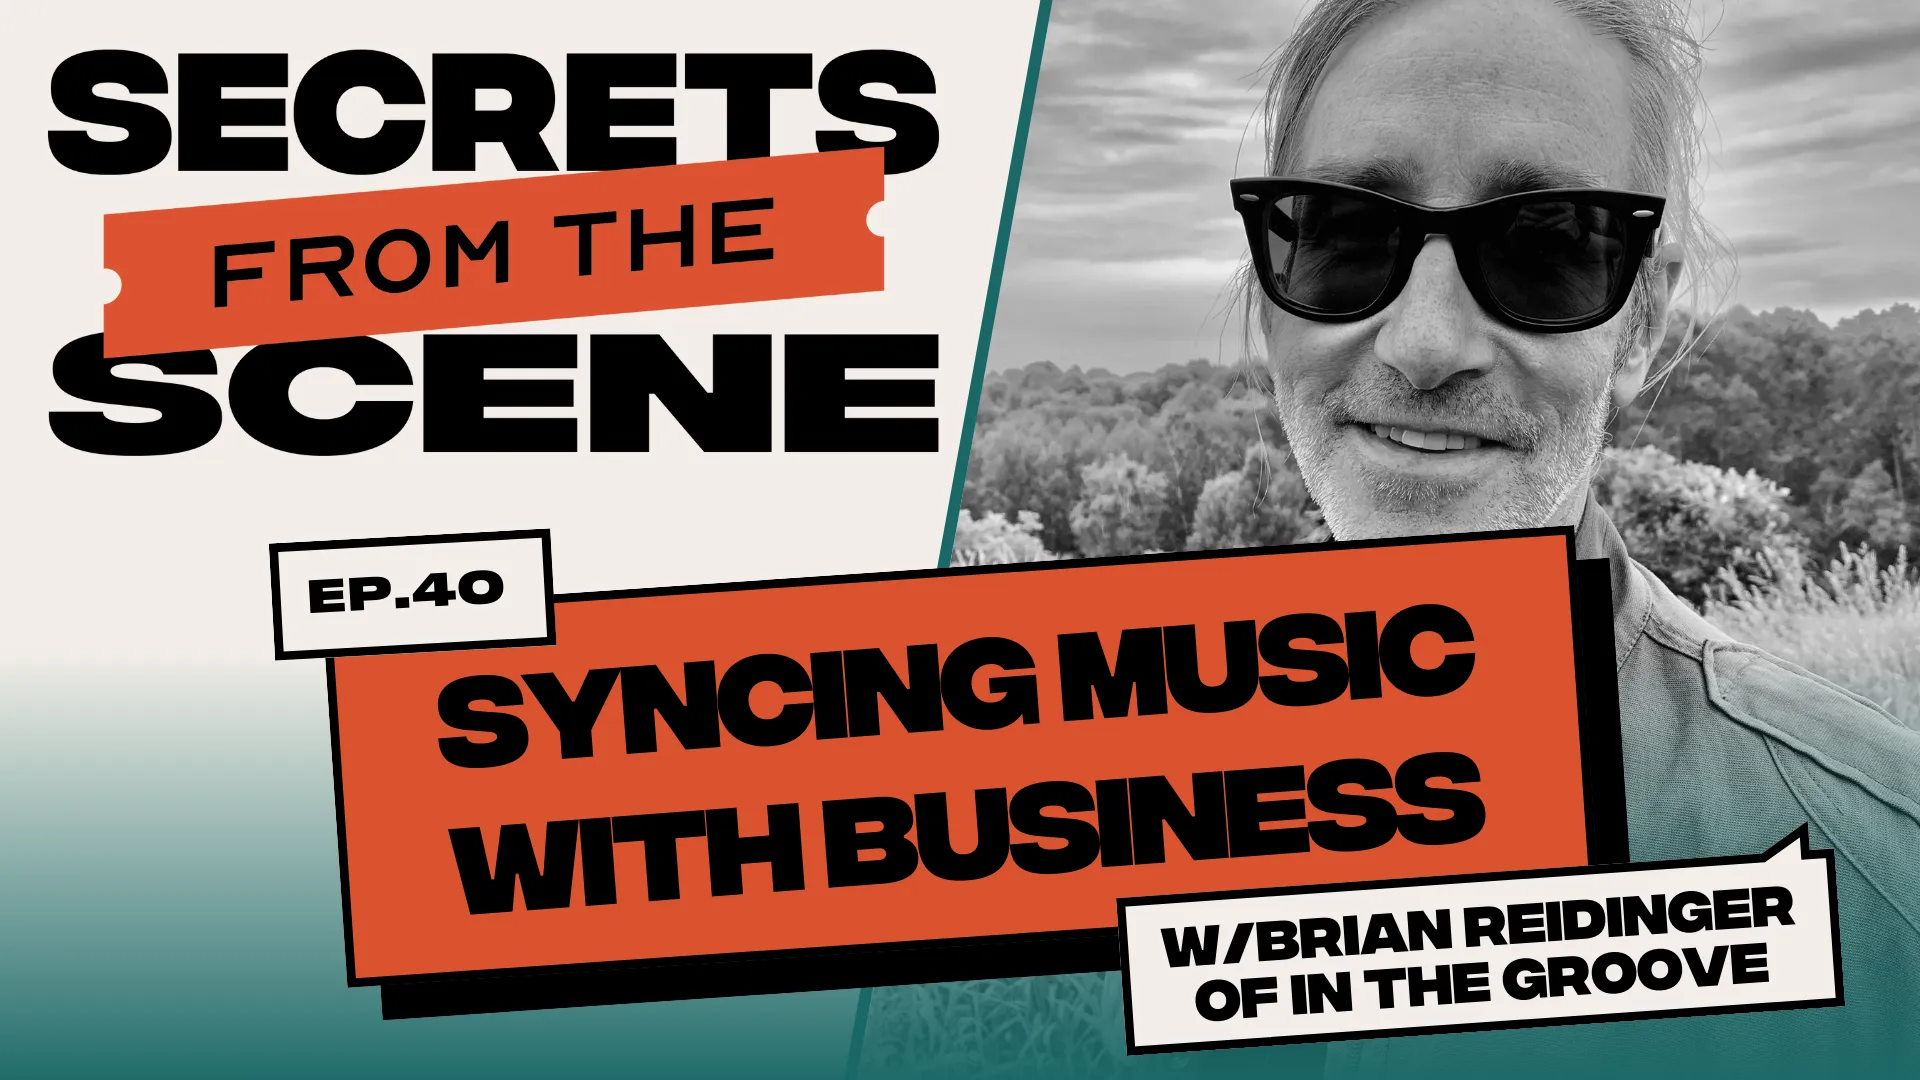 Ep. 40: Syncing Music with Business: Insights from Brian Reidinger of In The Groove